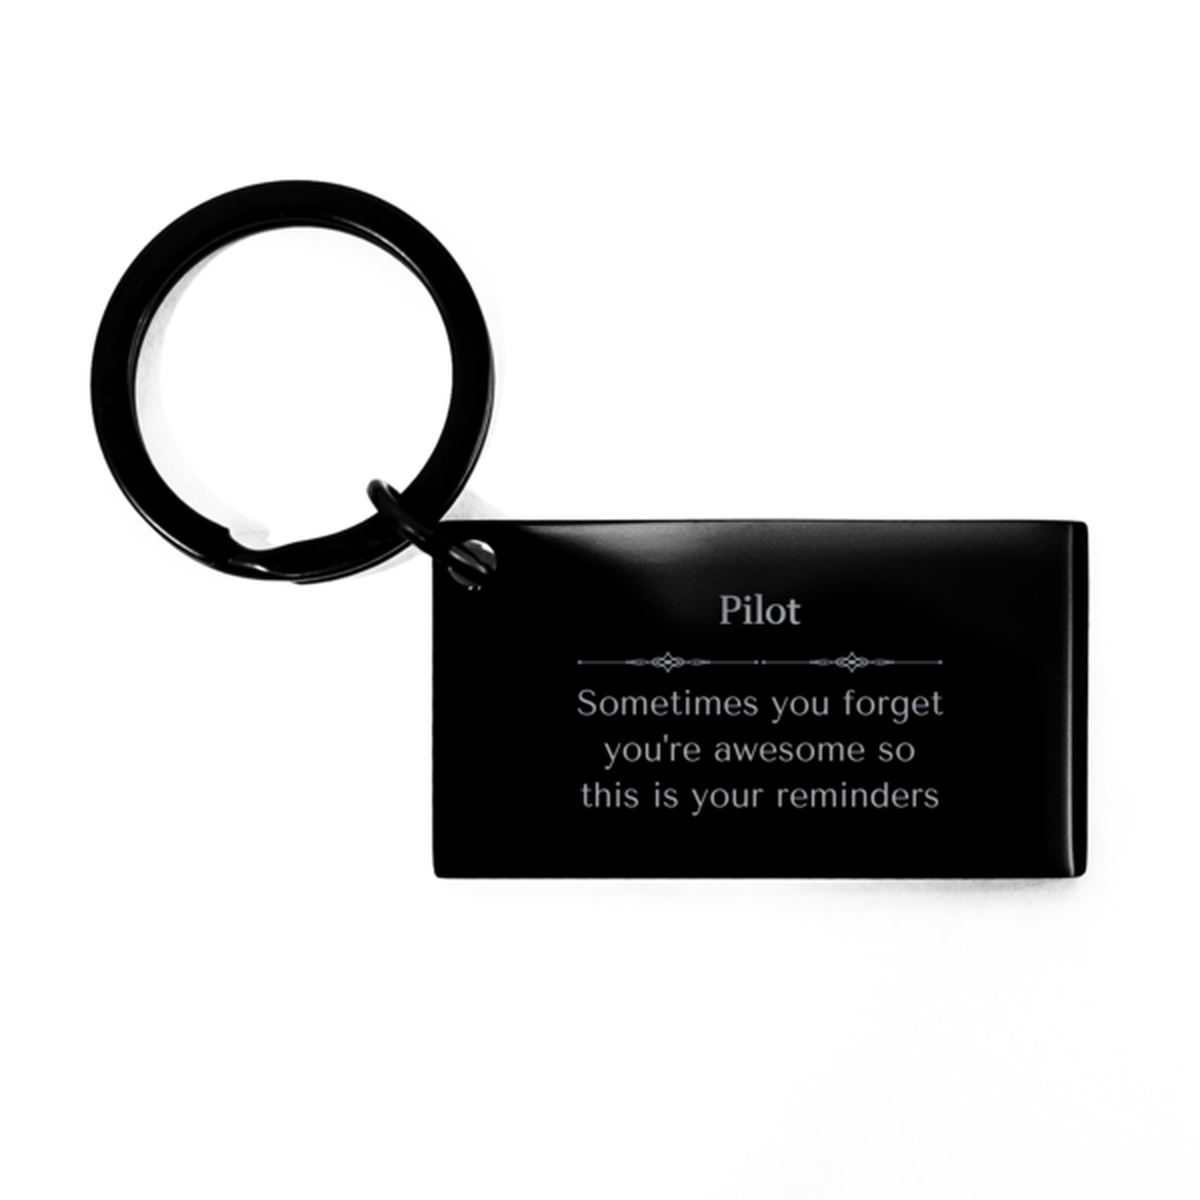 Sentimental Pilot Keychain, Schoolbus Driver Sometimes you forget you're awesome so this is your reminders, Graduation Christmas Birthday Gifts for Pilot, Men, Women, Coworkers